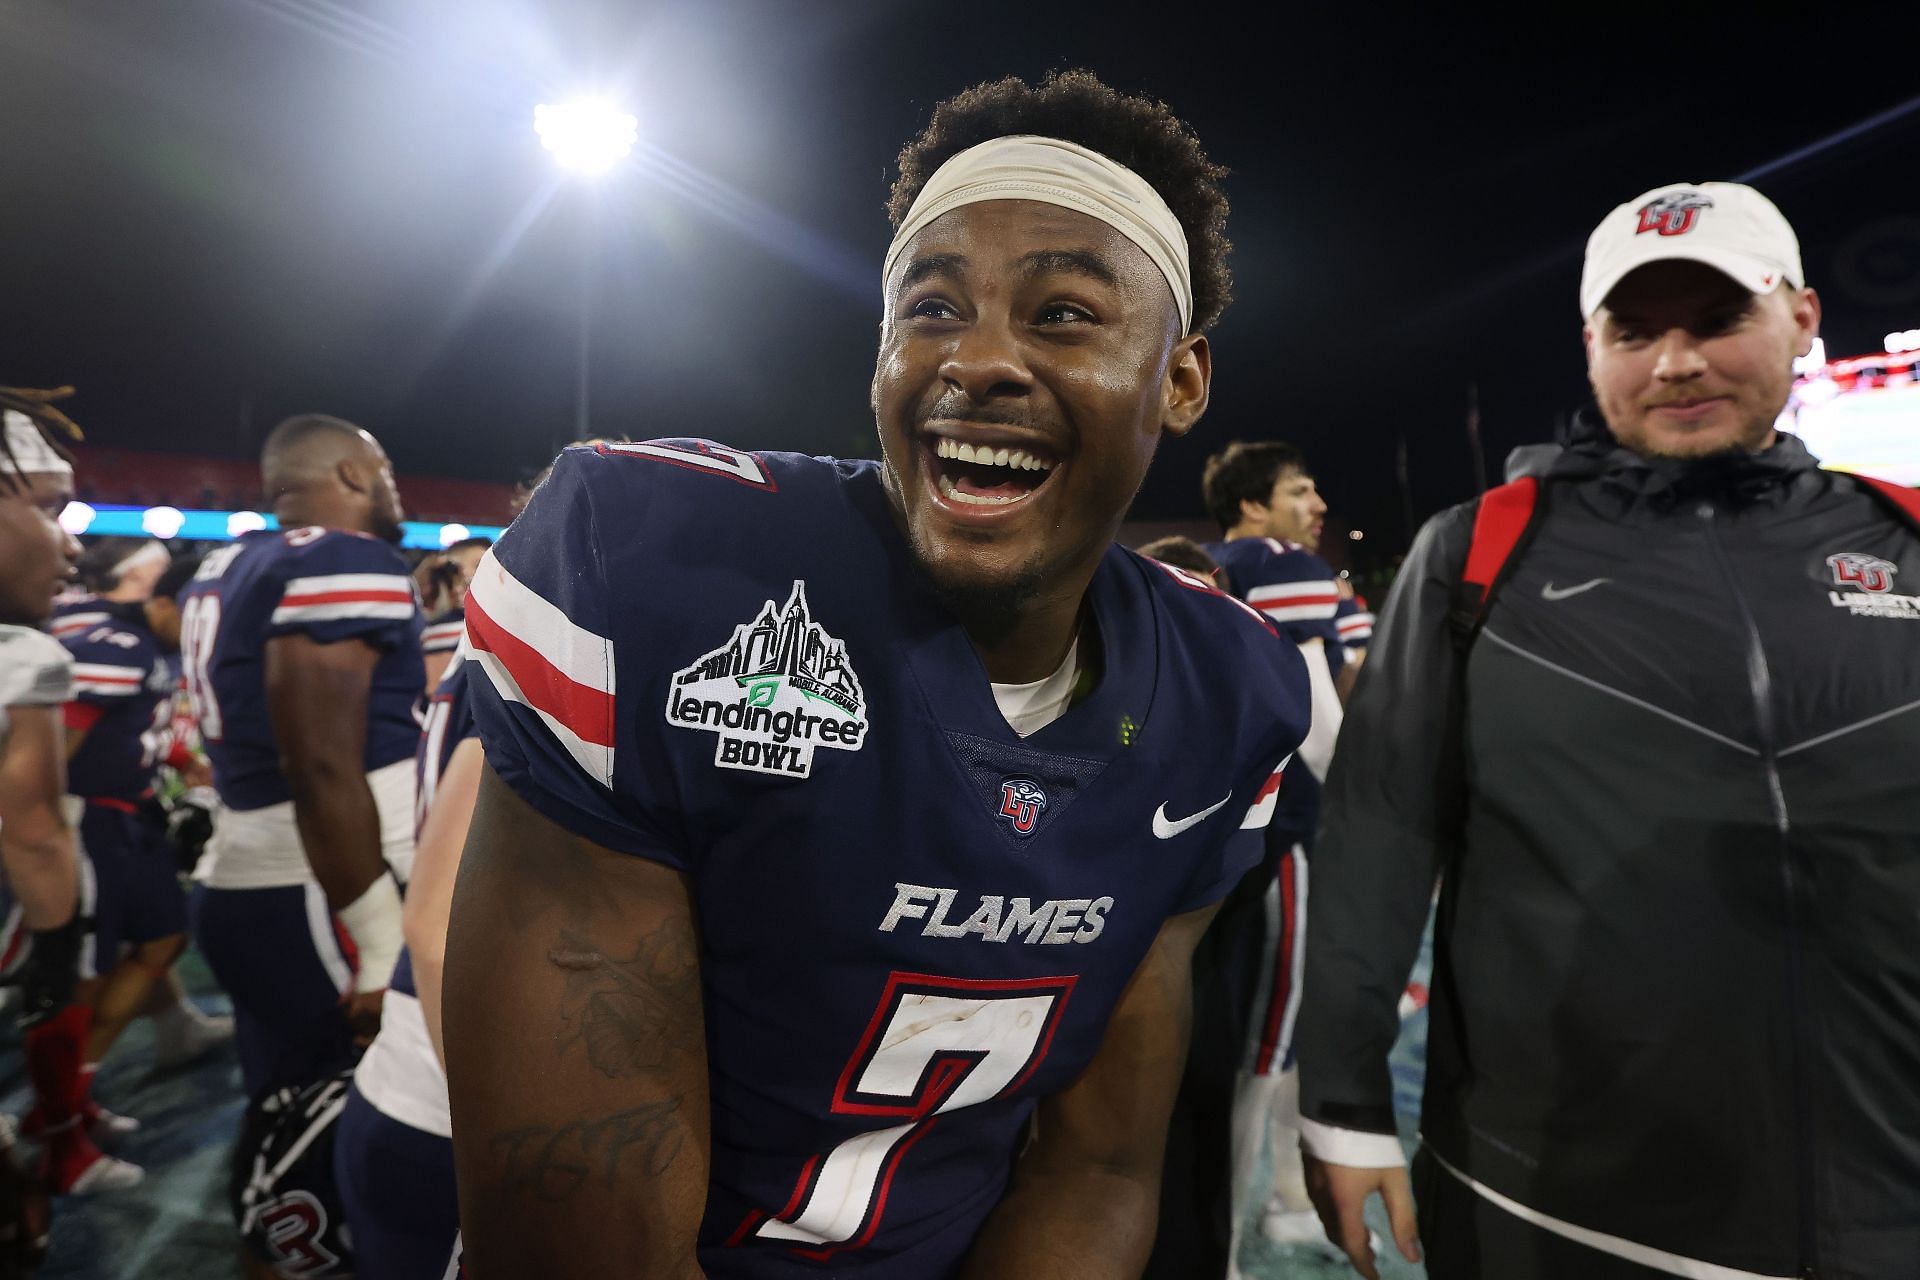 Malik Willis #7 of the Liberty Flames celebrates after winning the LendingTree Bowl against the Eastern Michigan Eagles at Hancock Whitney Stadium on December 18, 2021 in Mobile, Alabama.